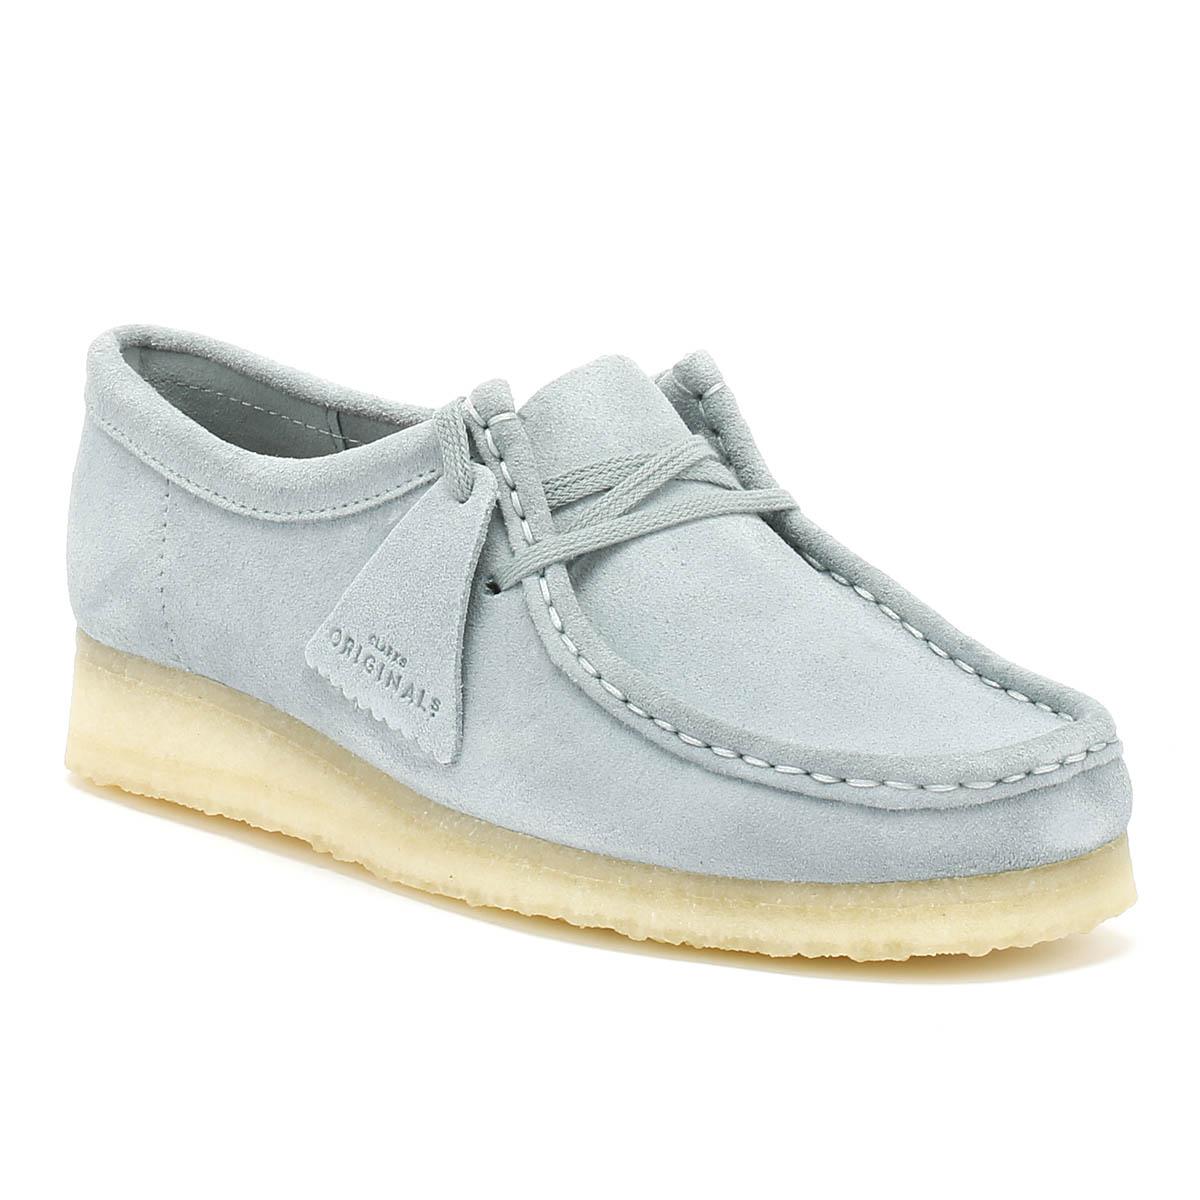 grey suede wallabees,Quality assurance,protein-burger.com